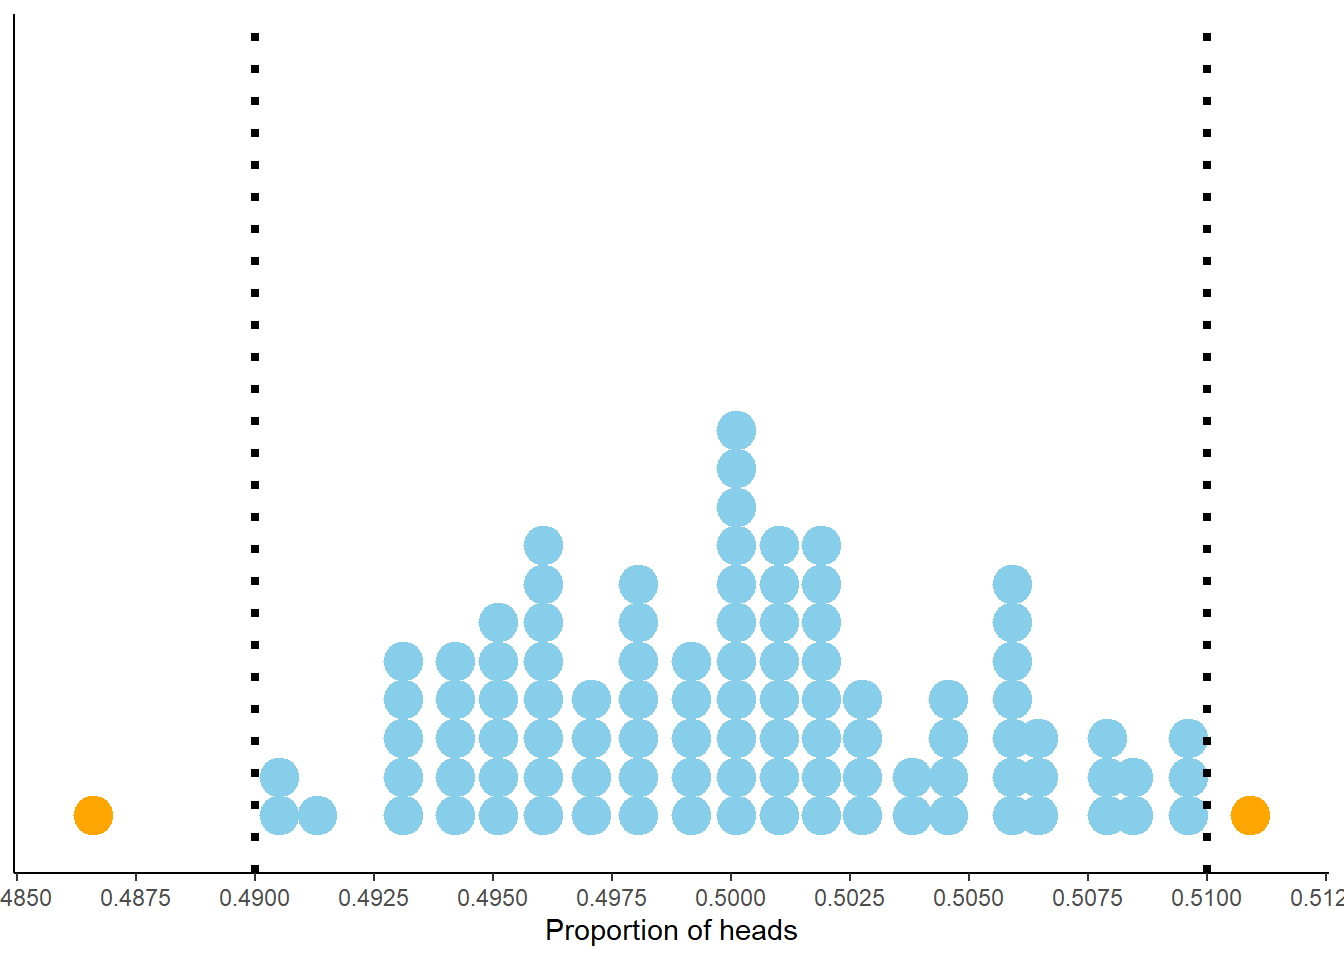 Proportion of flips which are heads in 100 sets of 10,000 fair coin flips. Each dot represents a set of 10,000 fair coin flips. In 97 of these 100 sets the proportion of heads is between 0.49 and 0.51 (the blue dots).